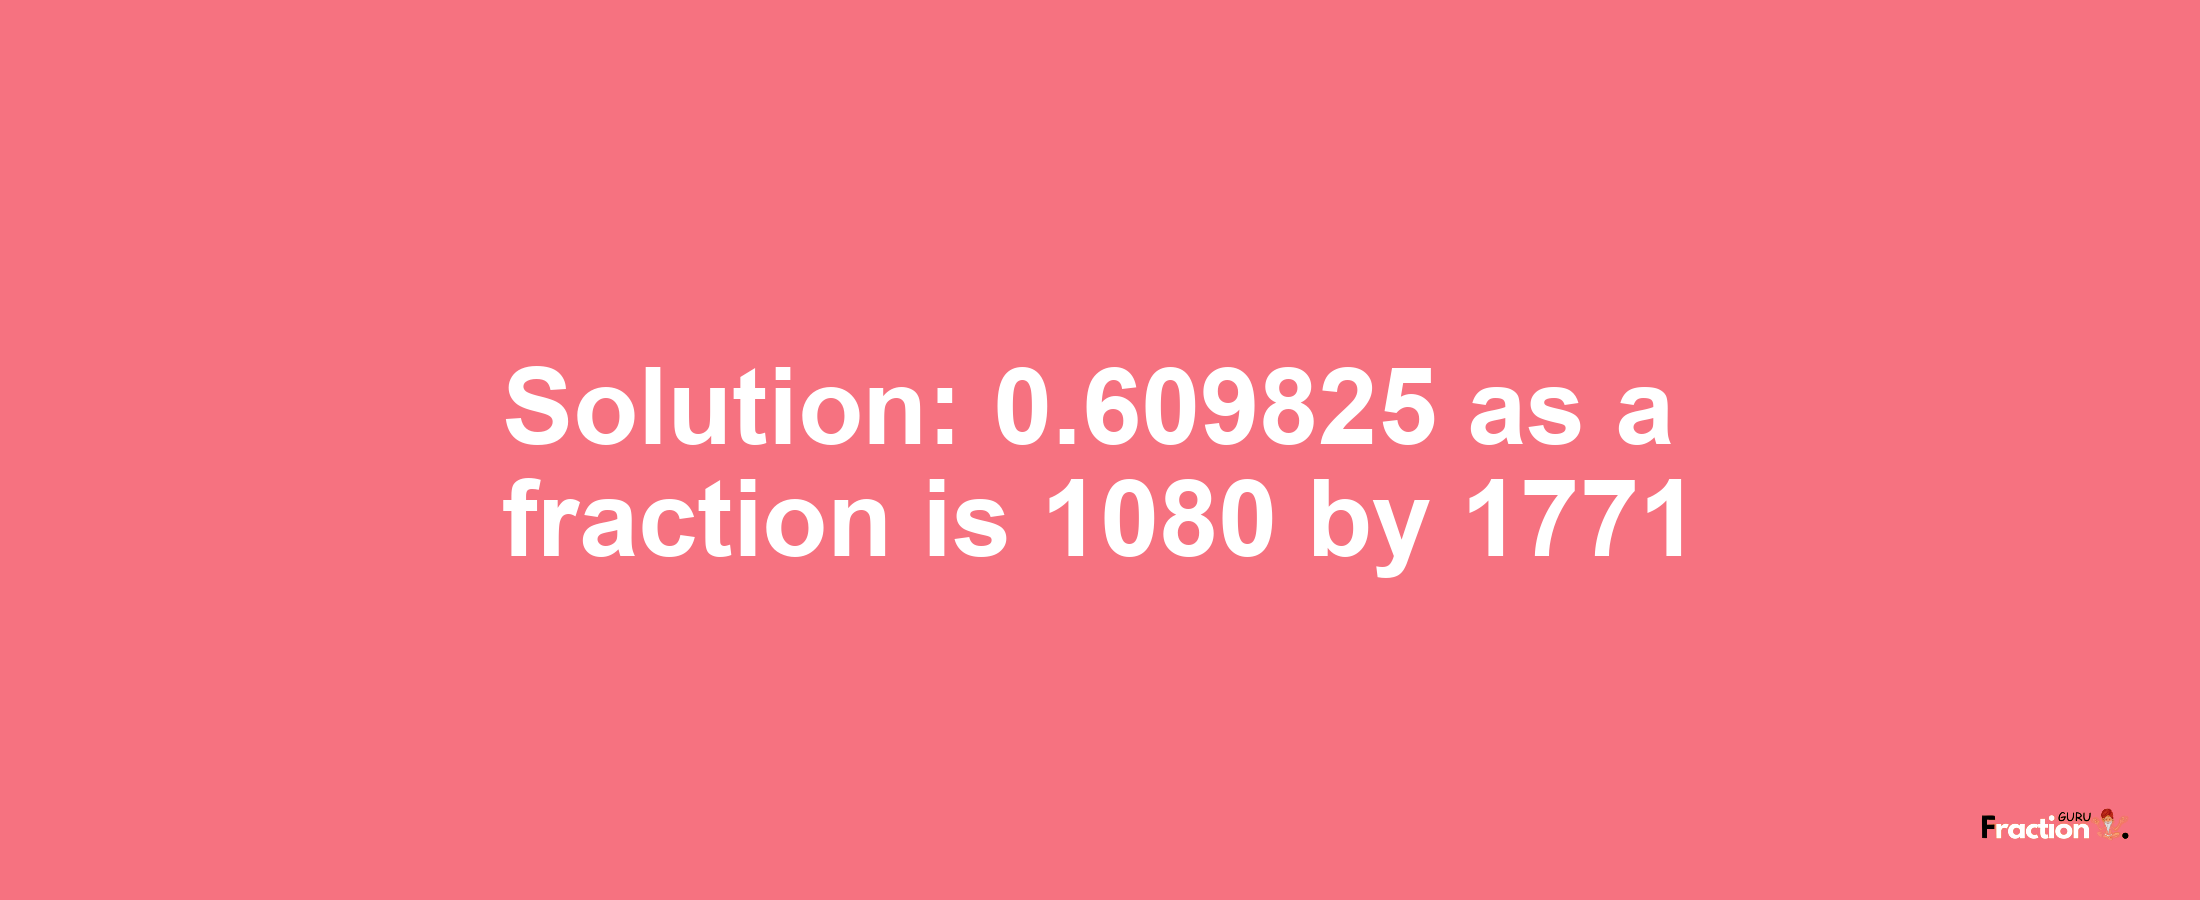 Solution:0.609825 as a fraction is 1080/1771